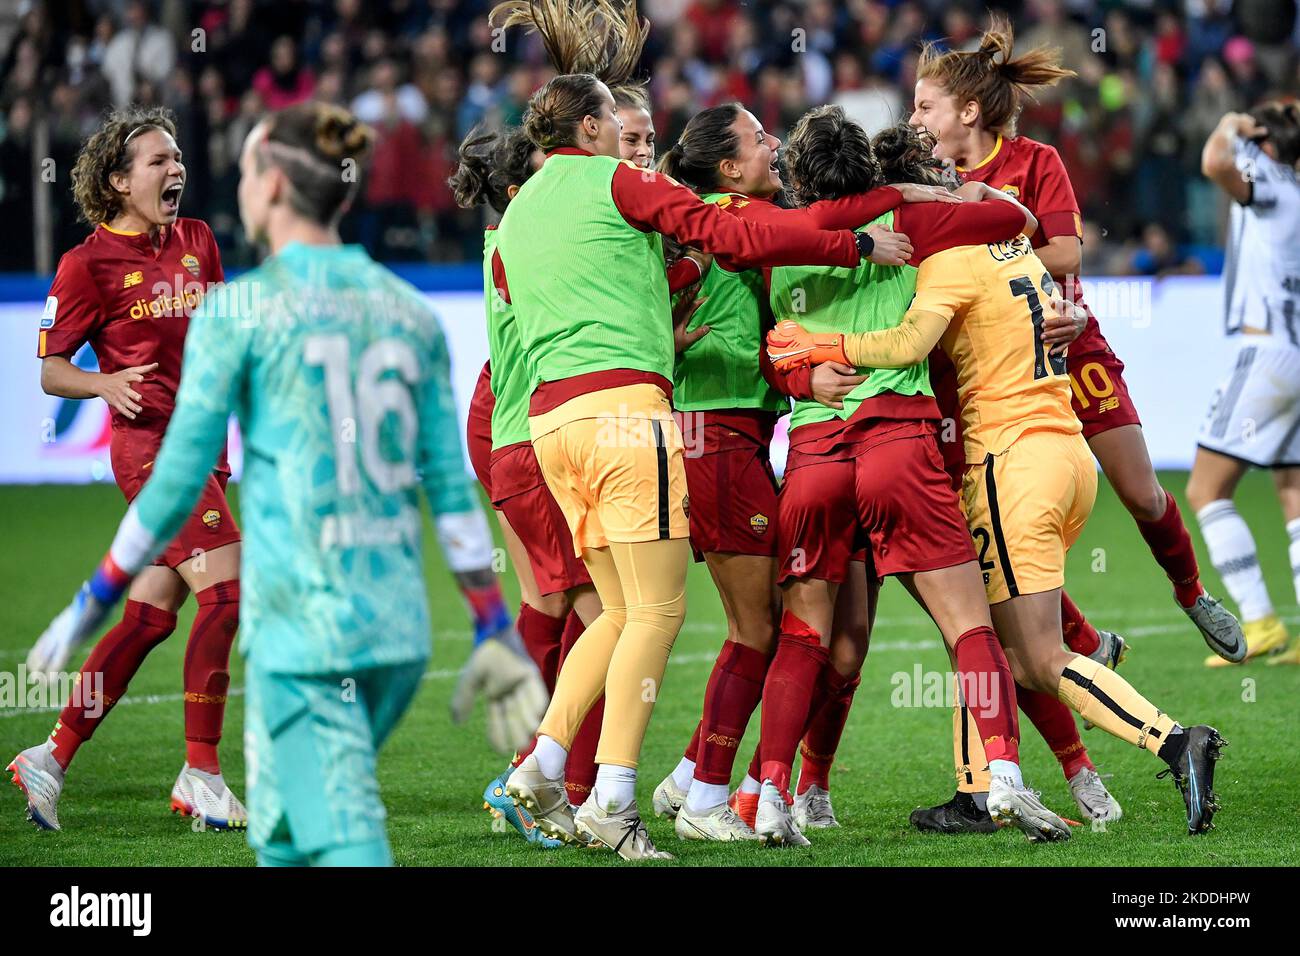 Parma, Italy. 05th Nov, 2022. AS Roma players celebrate at the end of the women italian supercup final between Juventus FC and AS Roma at Ennio Tardini stadium in Parma (Italy), November 5th, 2022. Photo Andrea Staccioli/Insidefoto Credit: Insidefoto di andrea staccioli/Alamy Live News Stock Photo